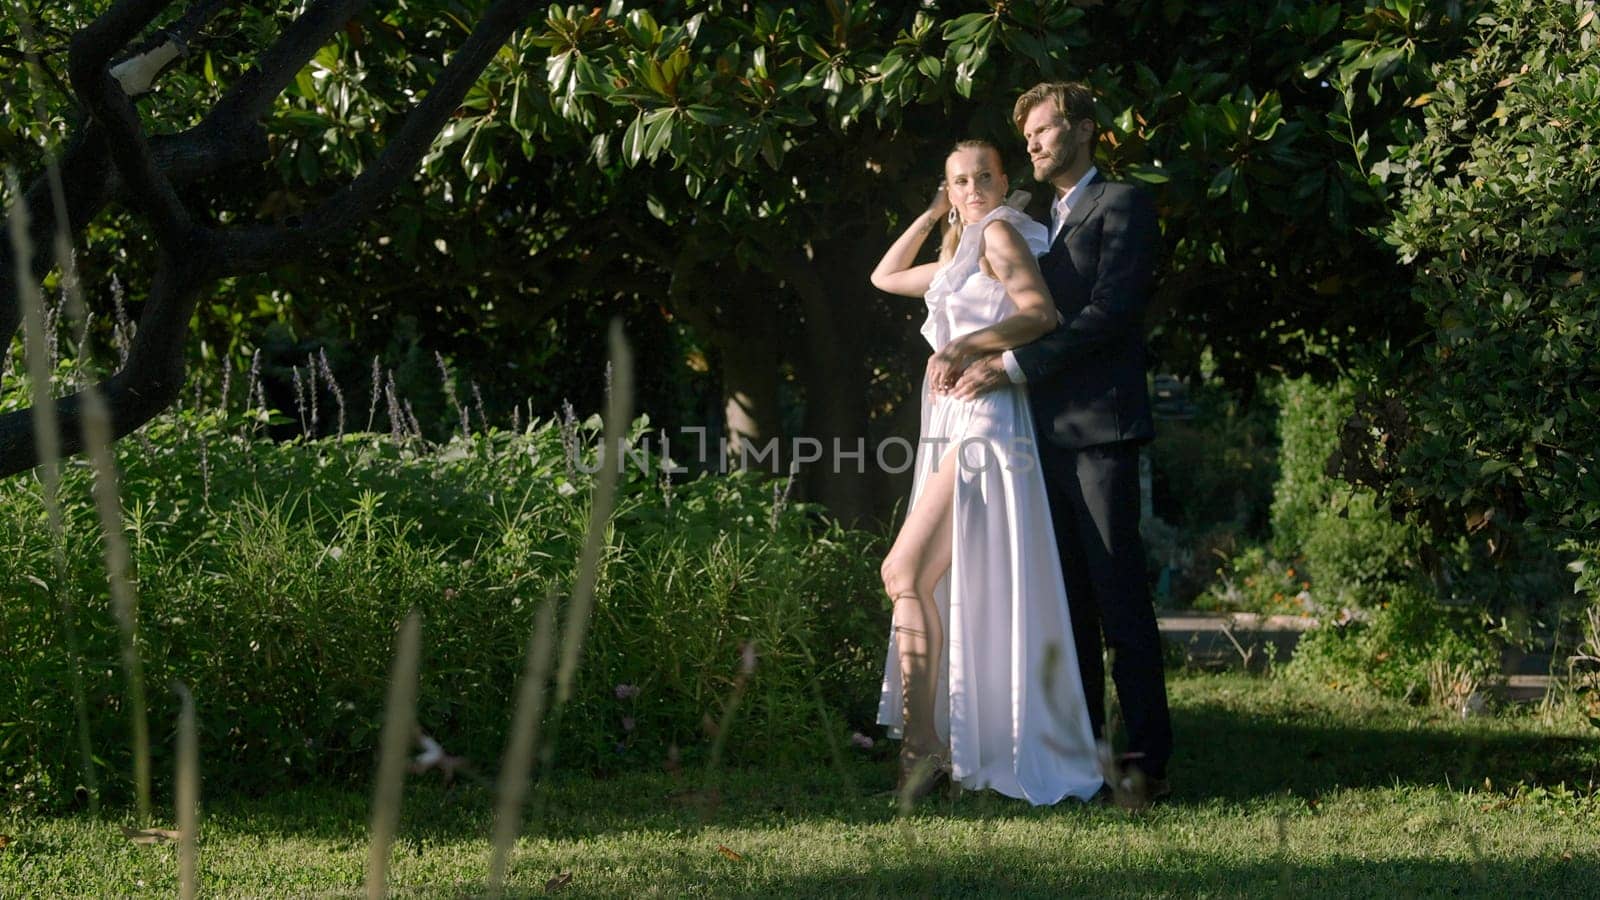 The bride and groom sitting by the tree trunk and hugging in the park. Action. Concept of romance and love, wedding traditions. by Mediawhalestock